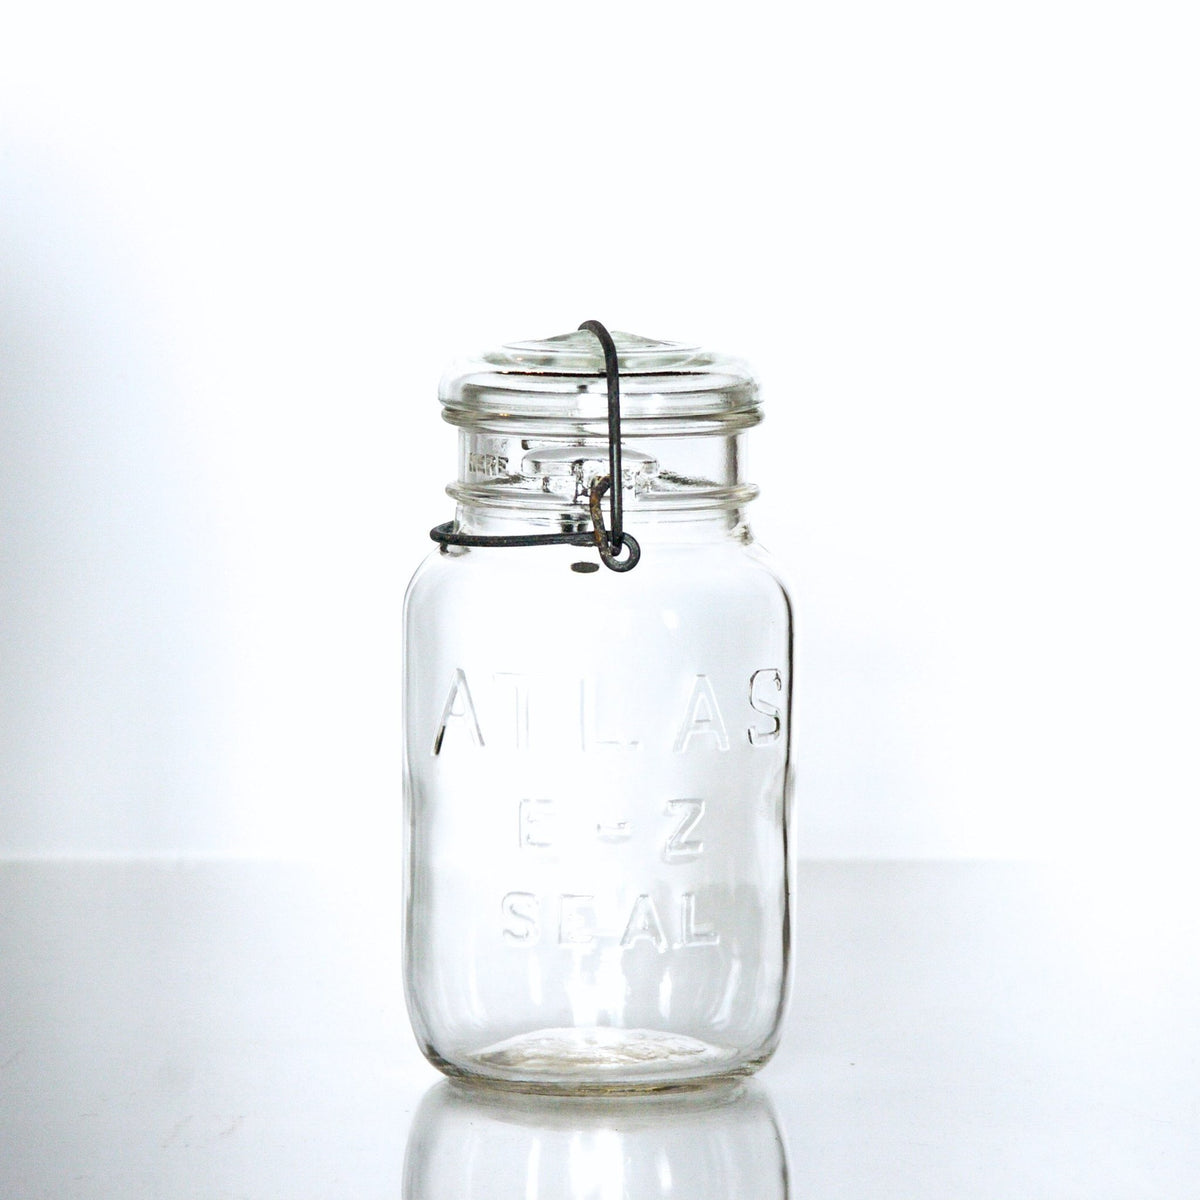 Vintage Atlas E-Z Seal quart mason jar with  wire bail and glass lid, against a white background 